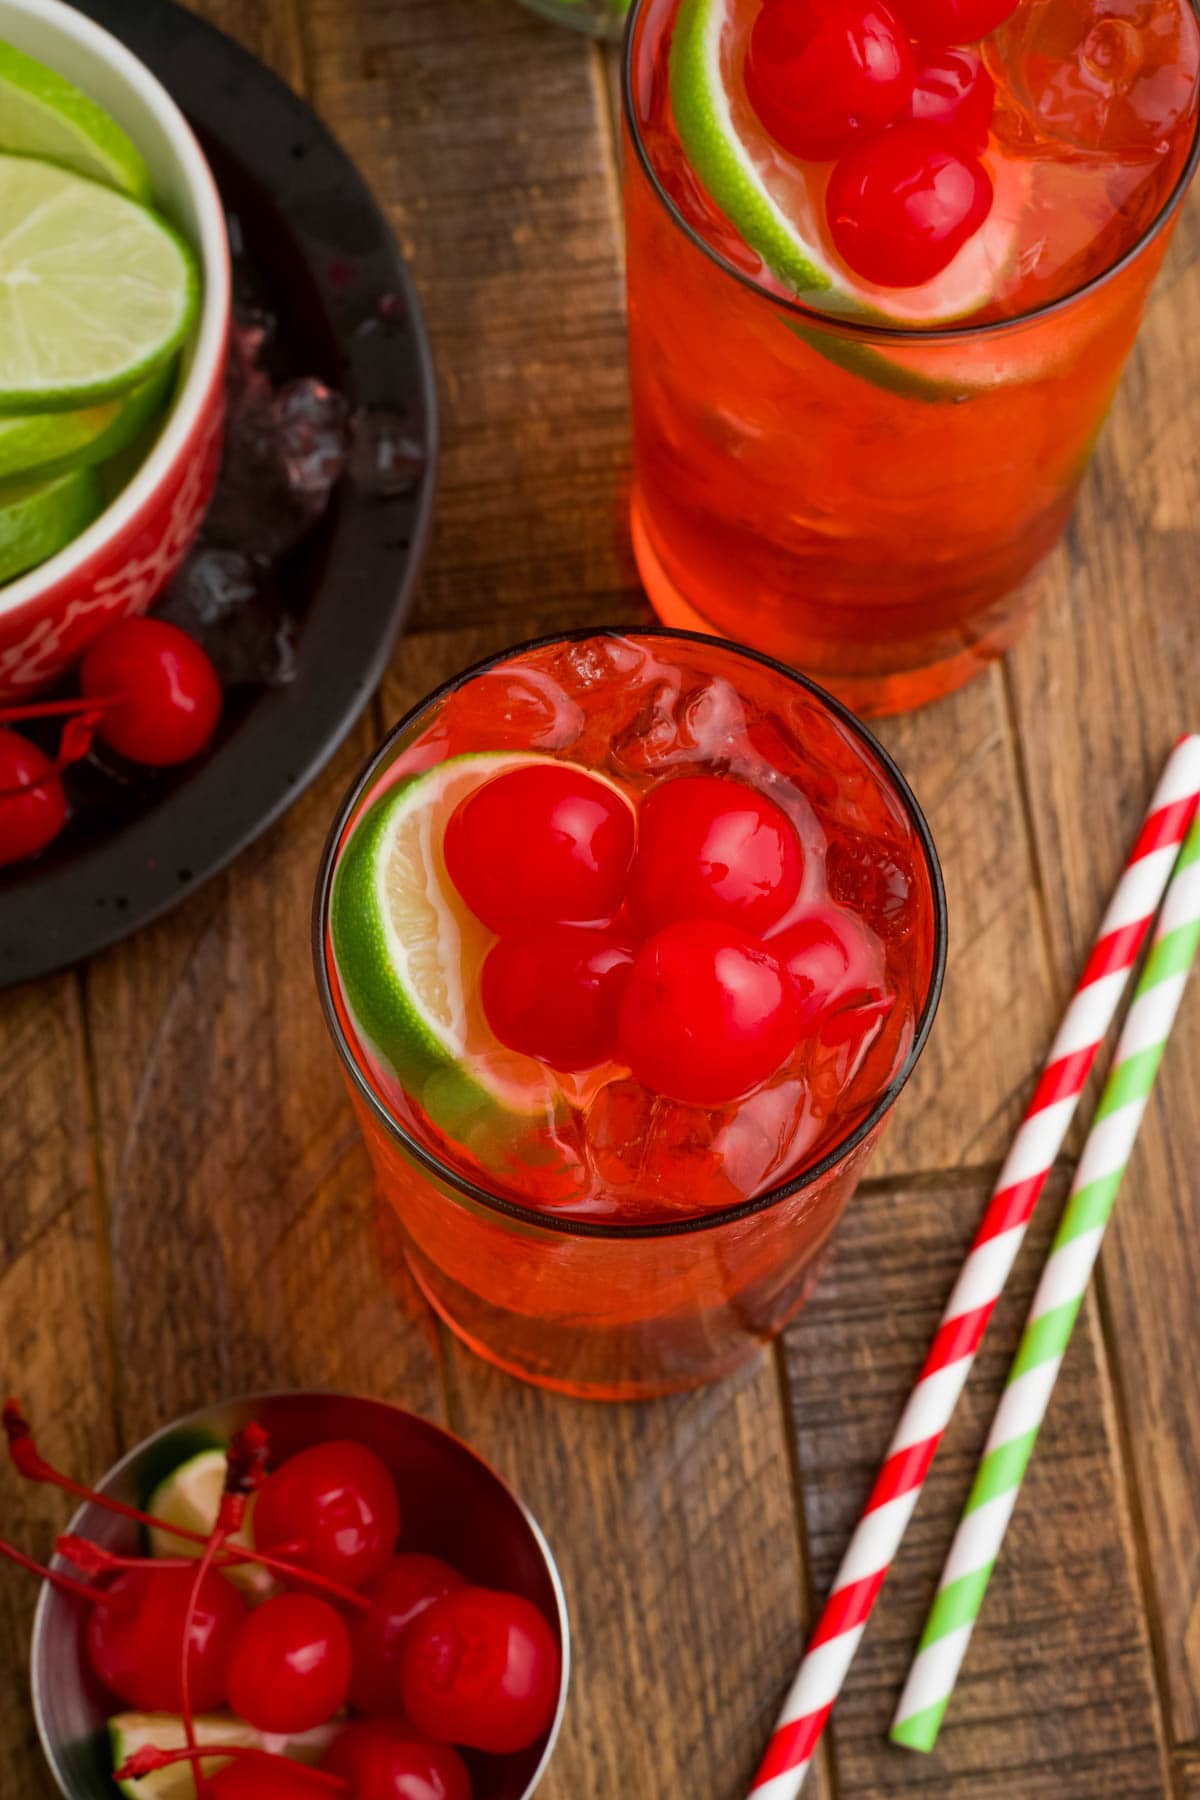 Red beverage with cherries and limes in a tall glass.